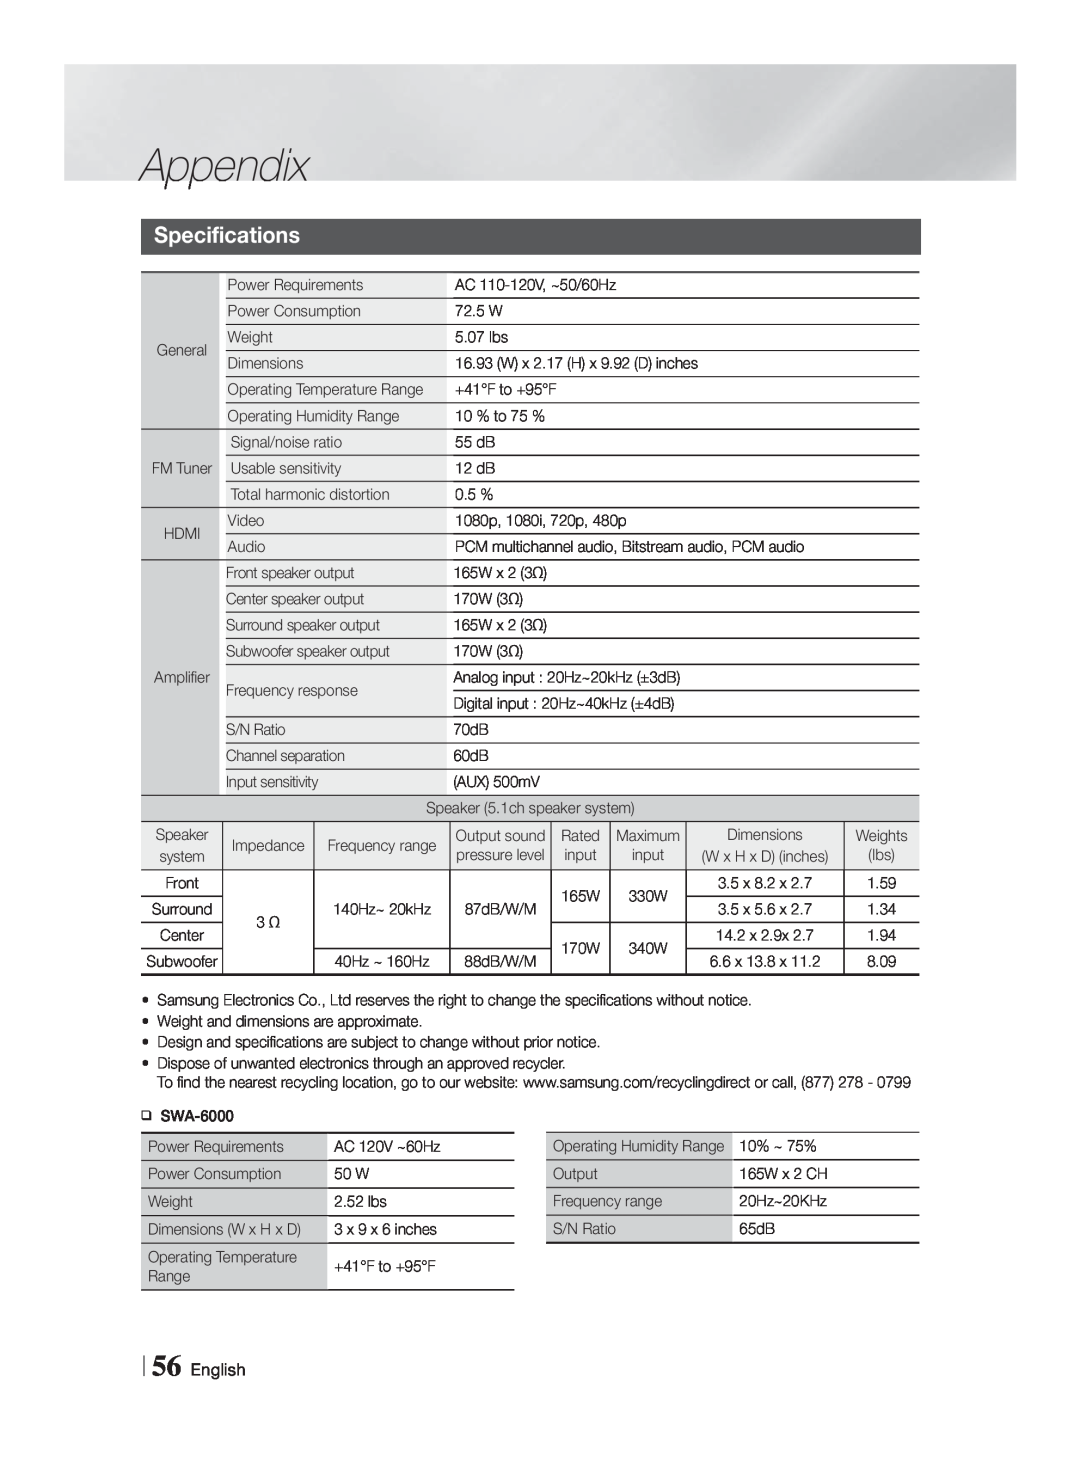 Samsung HT-F5500W, HTF5500WZA user manual Specifications, Appendix, English 